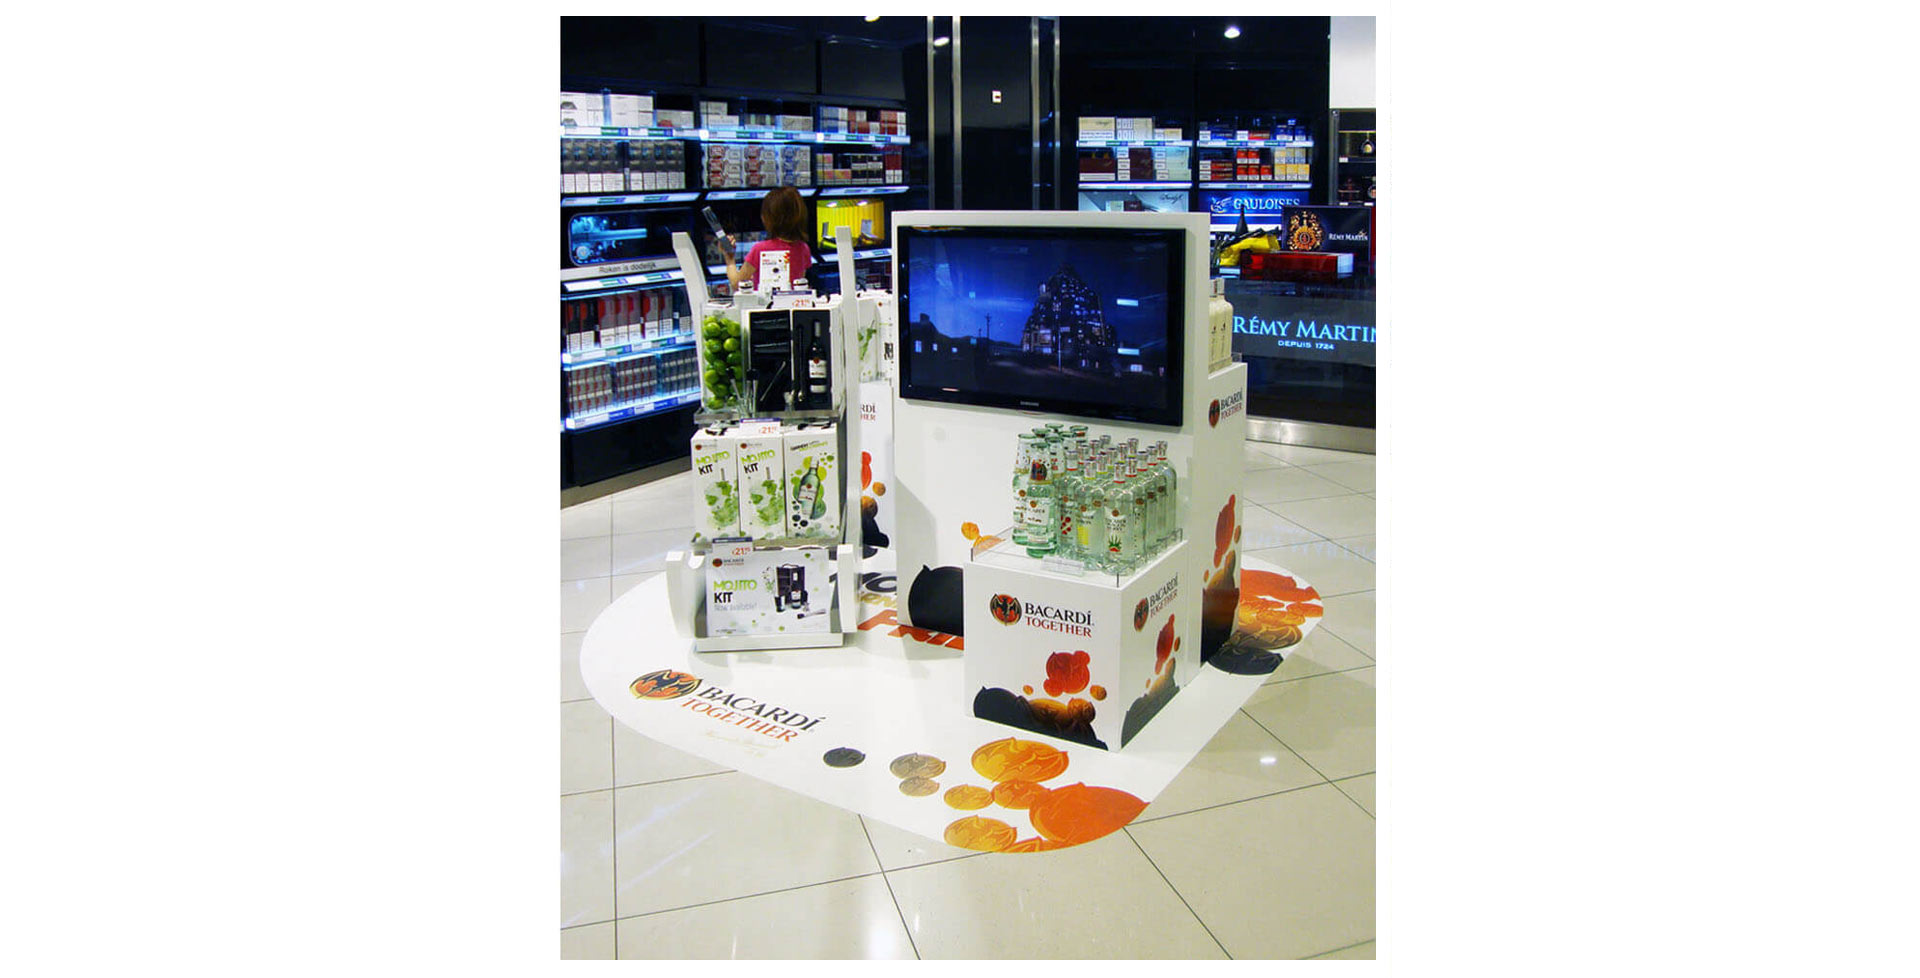 Bacardi Together brand identity Mojito garnish with mint and friends promotion campaigns for travel retail